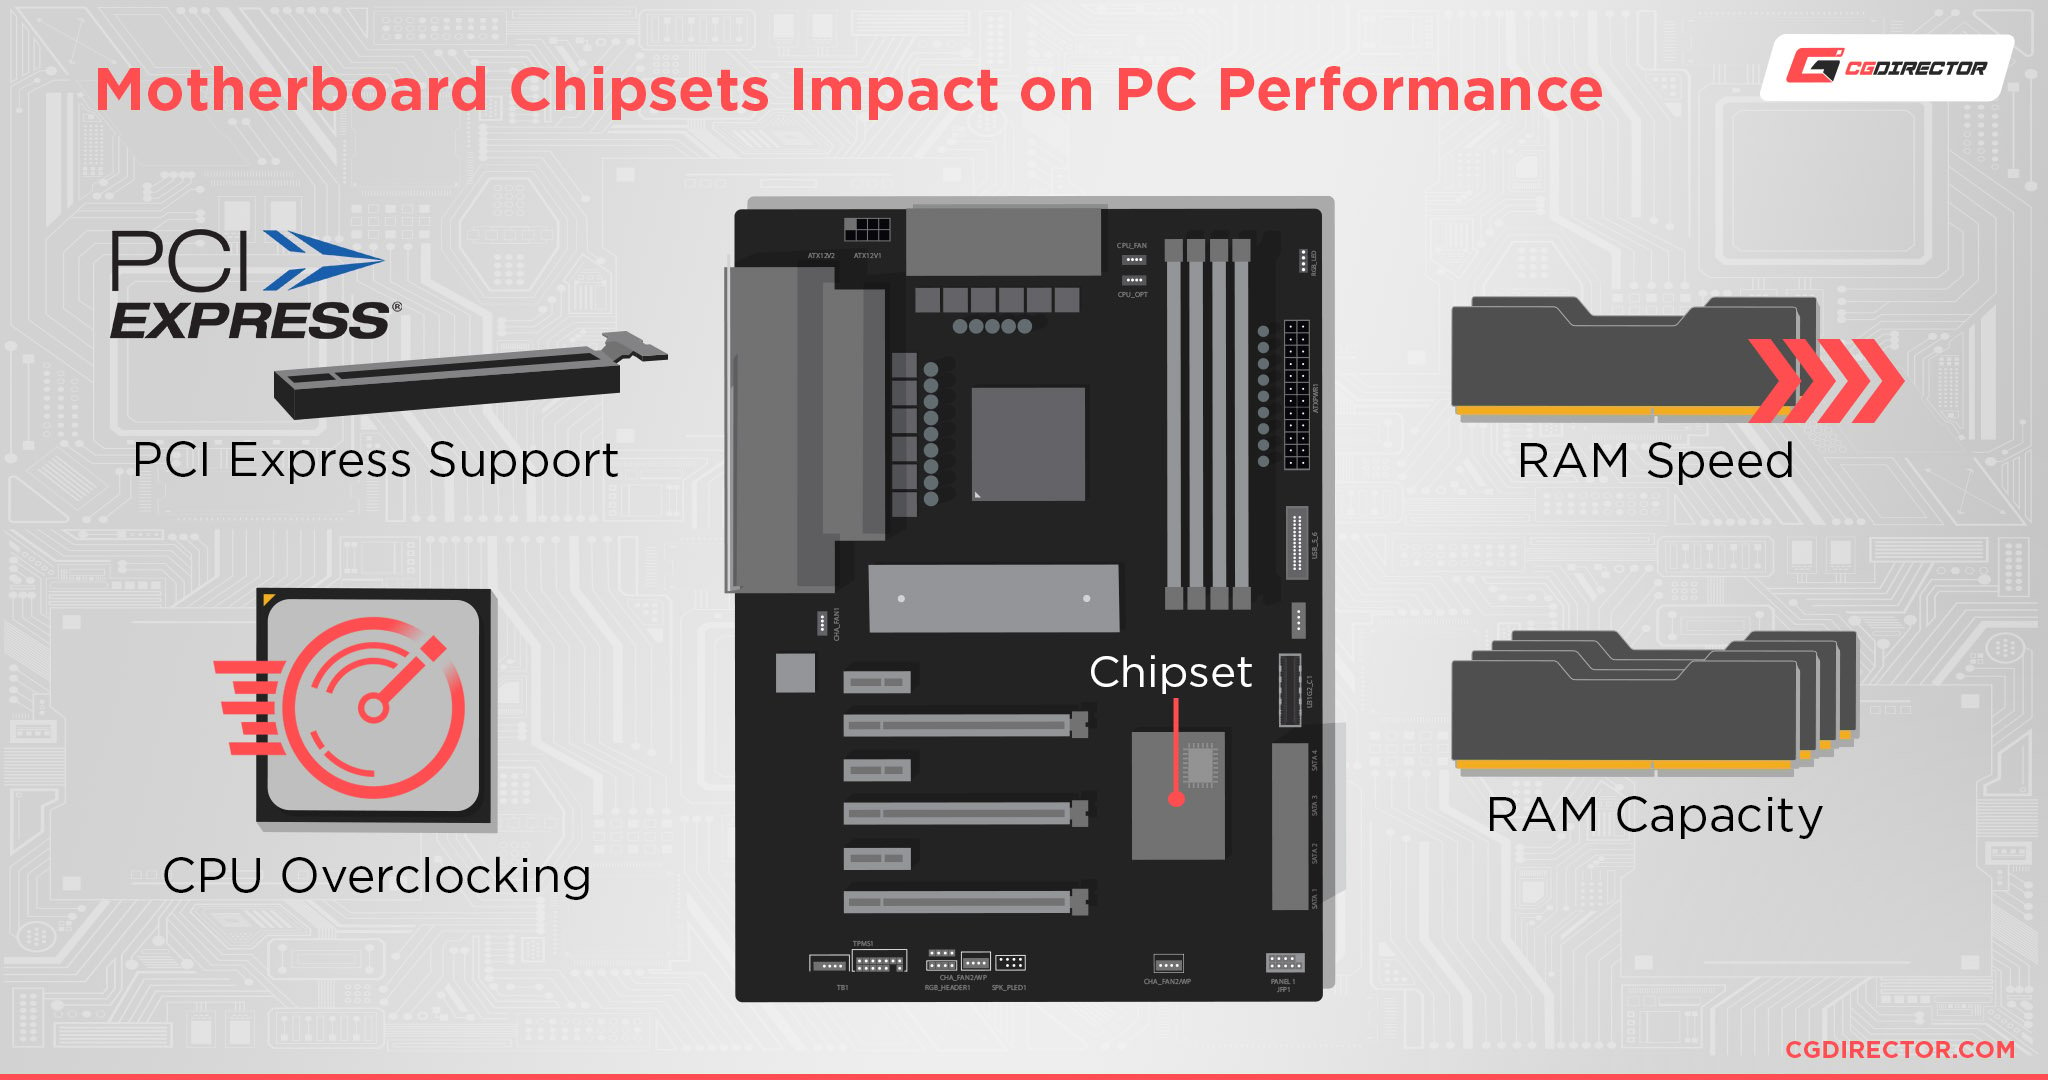 Motherboard Chipsets Impact on PC Performance